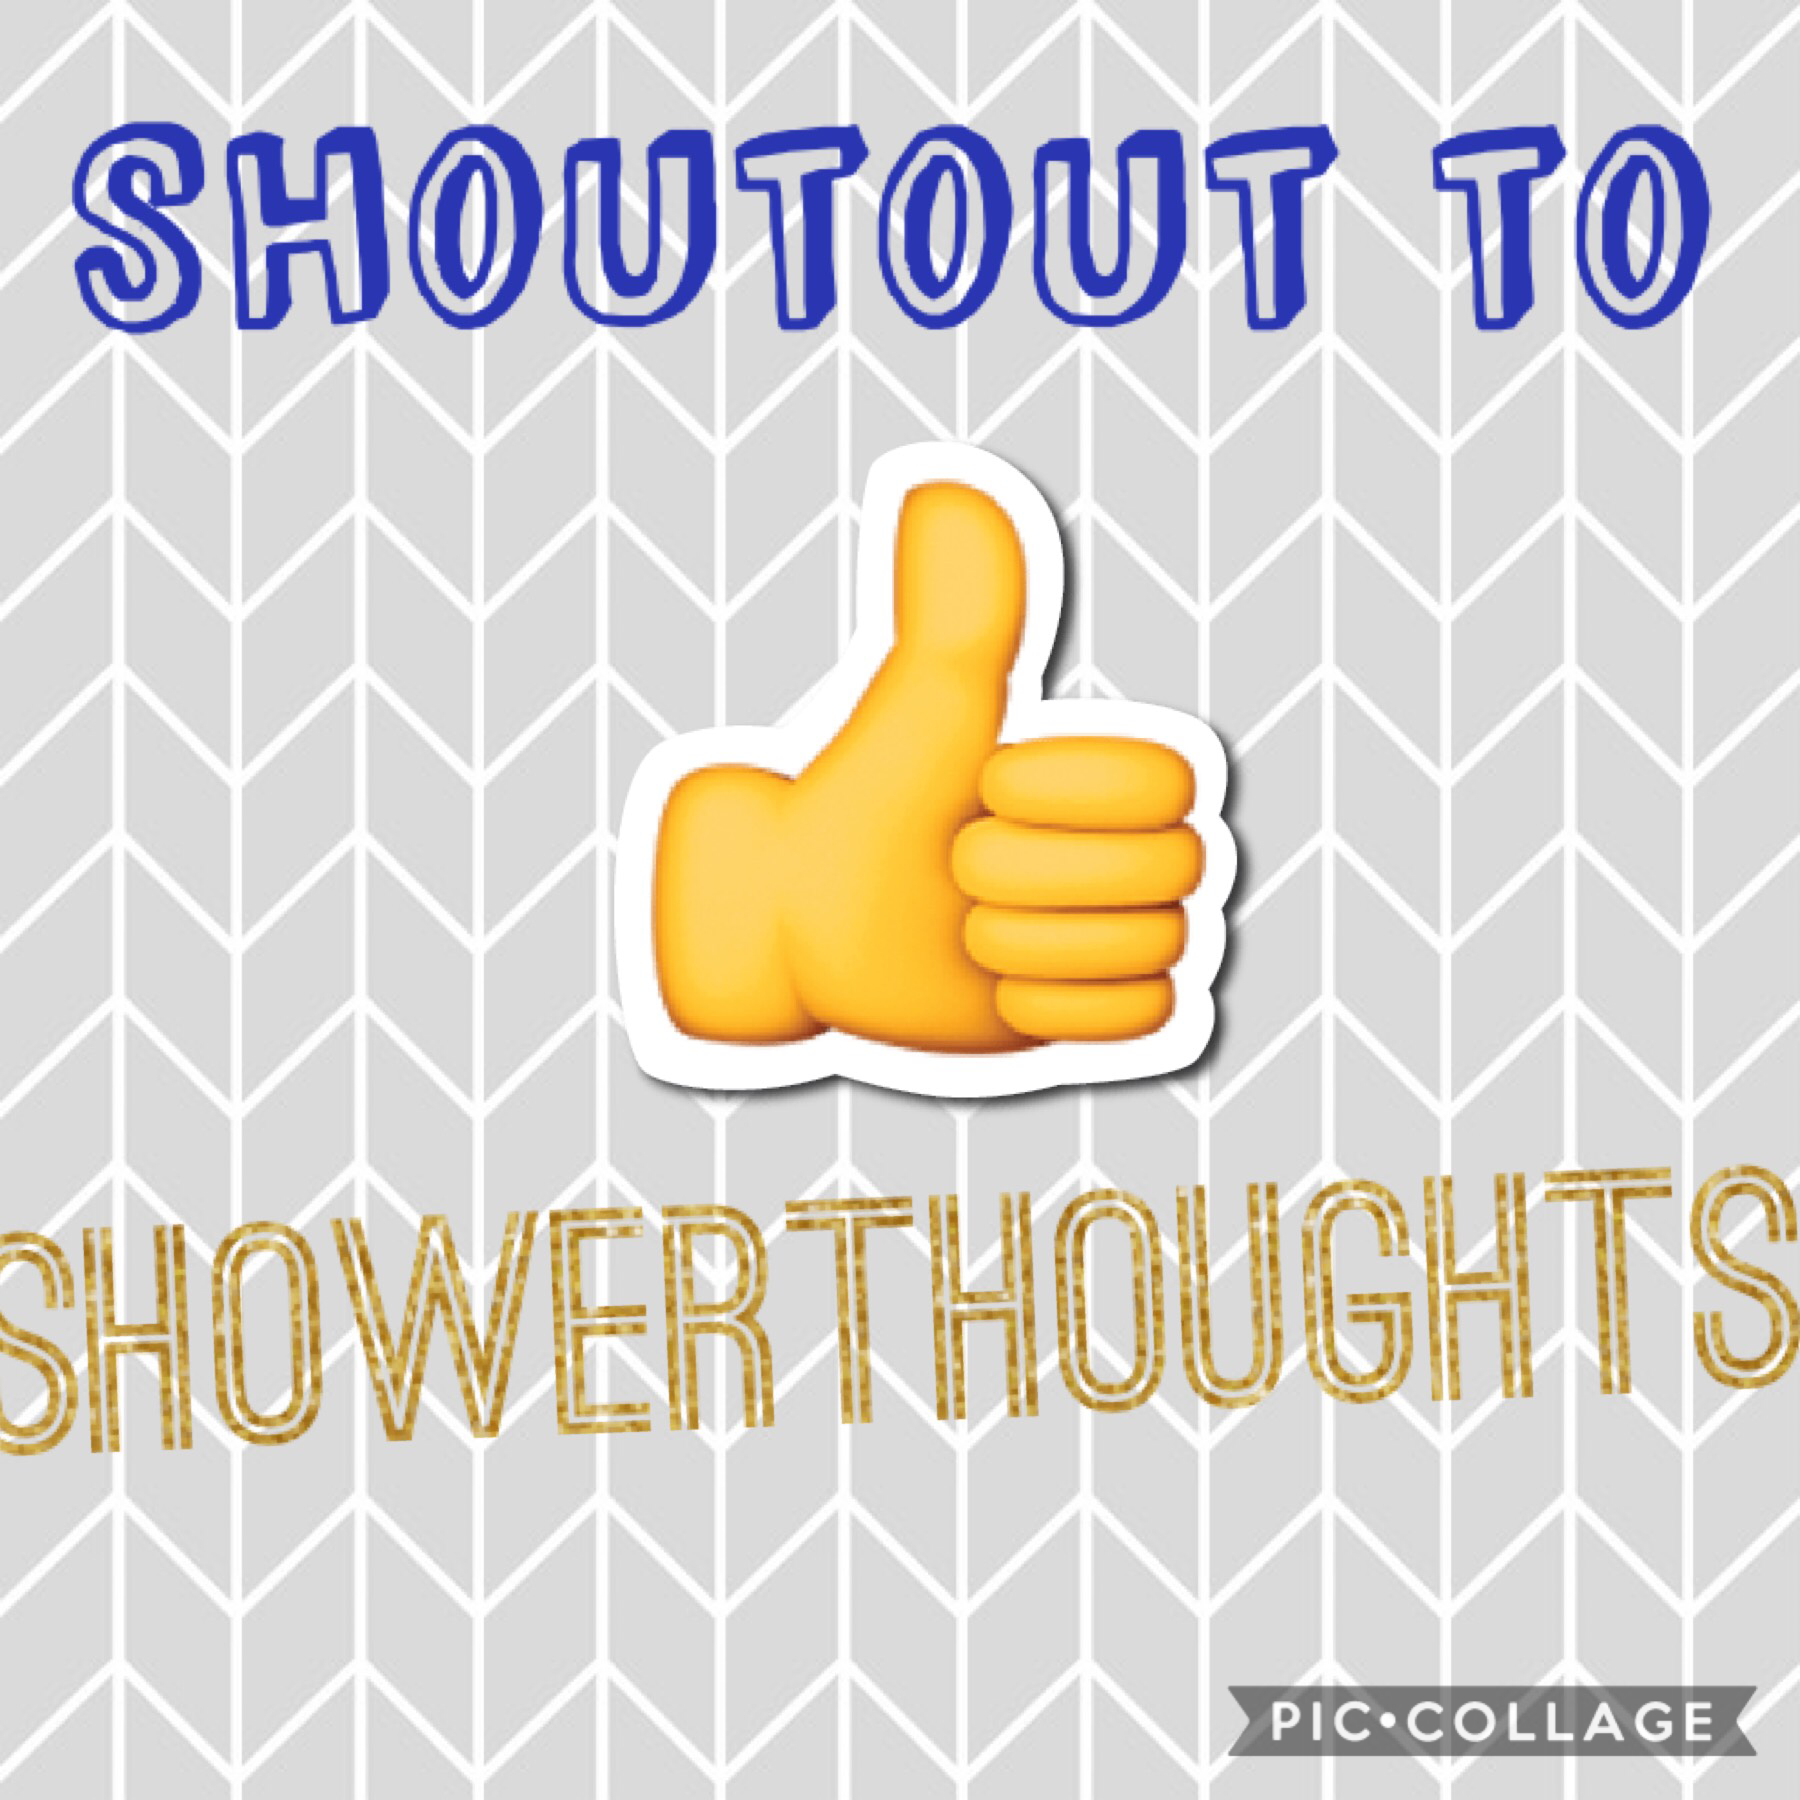 Shoutout to showerthoughts